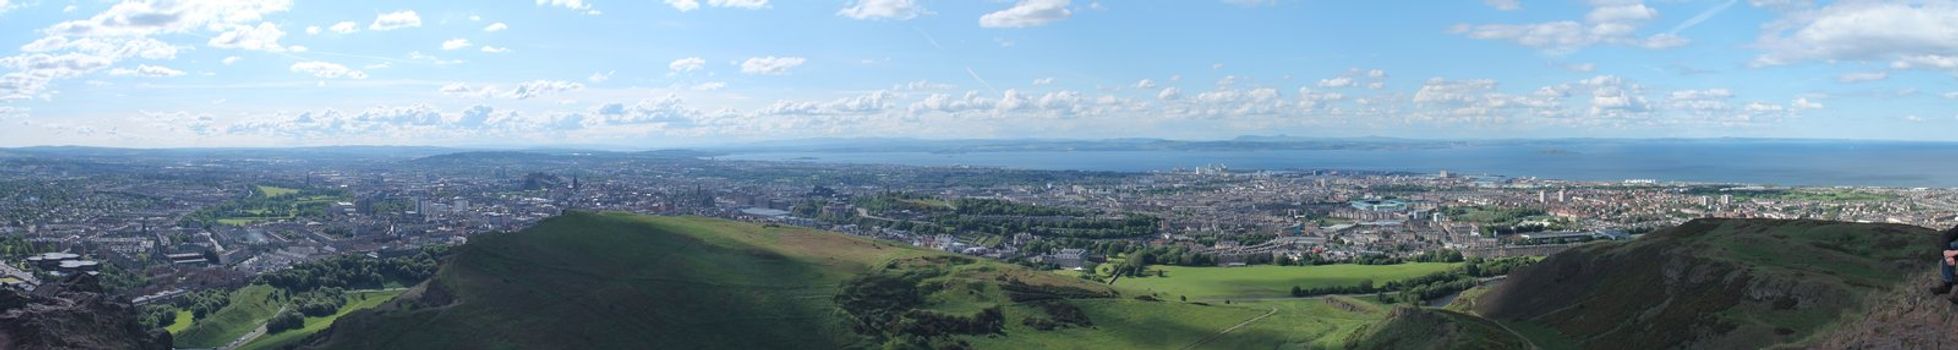 Panoramic photo of Edinburgh, view from Arthur's Seat. This photo is made attaching together various photos.